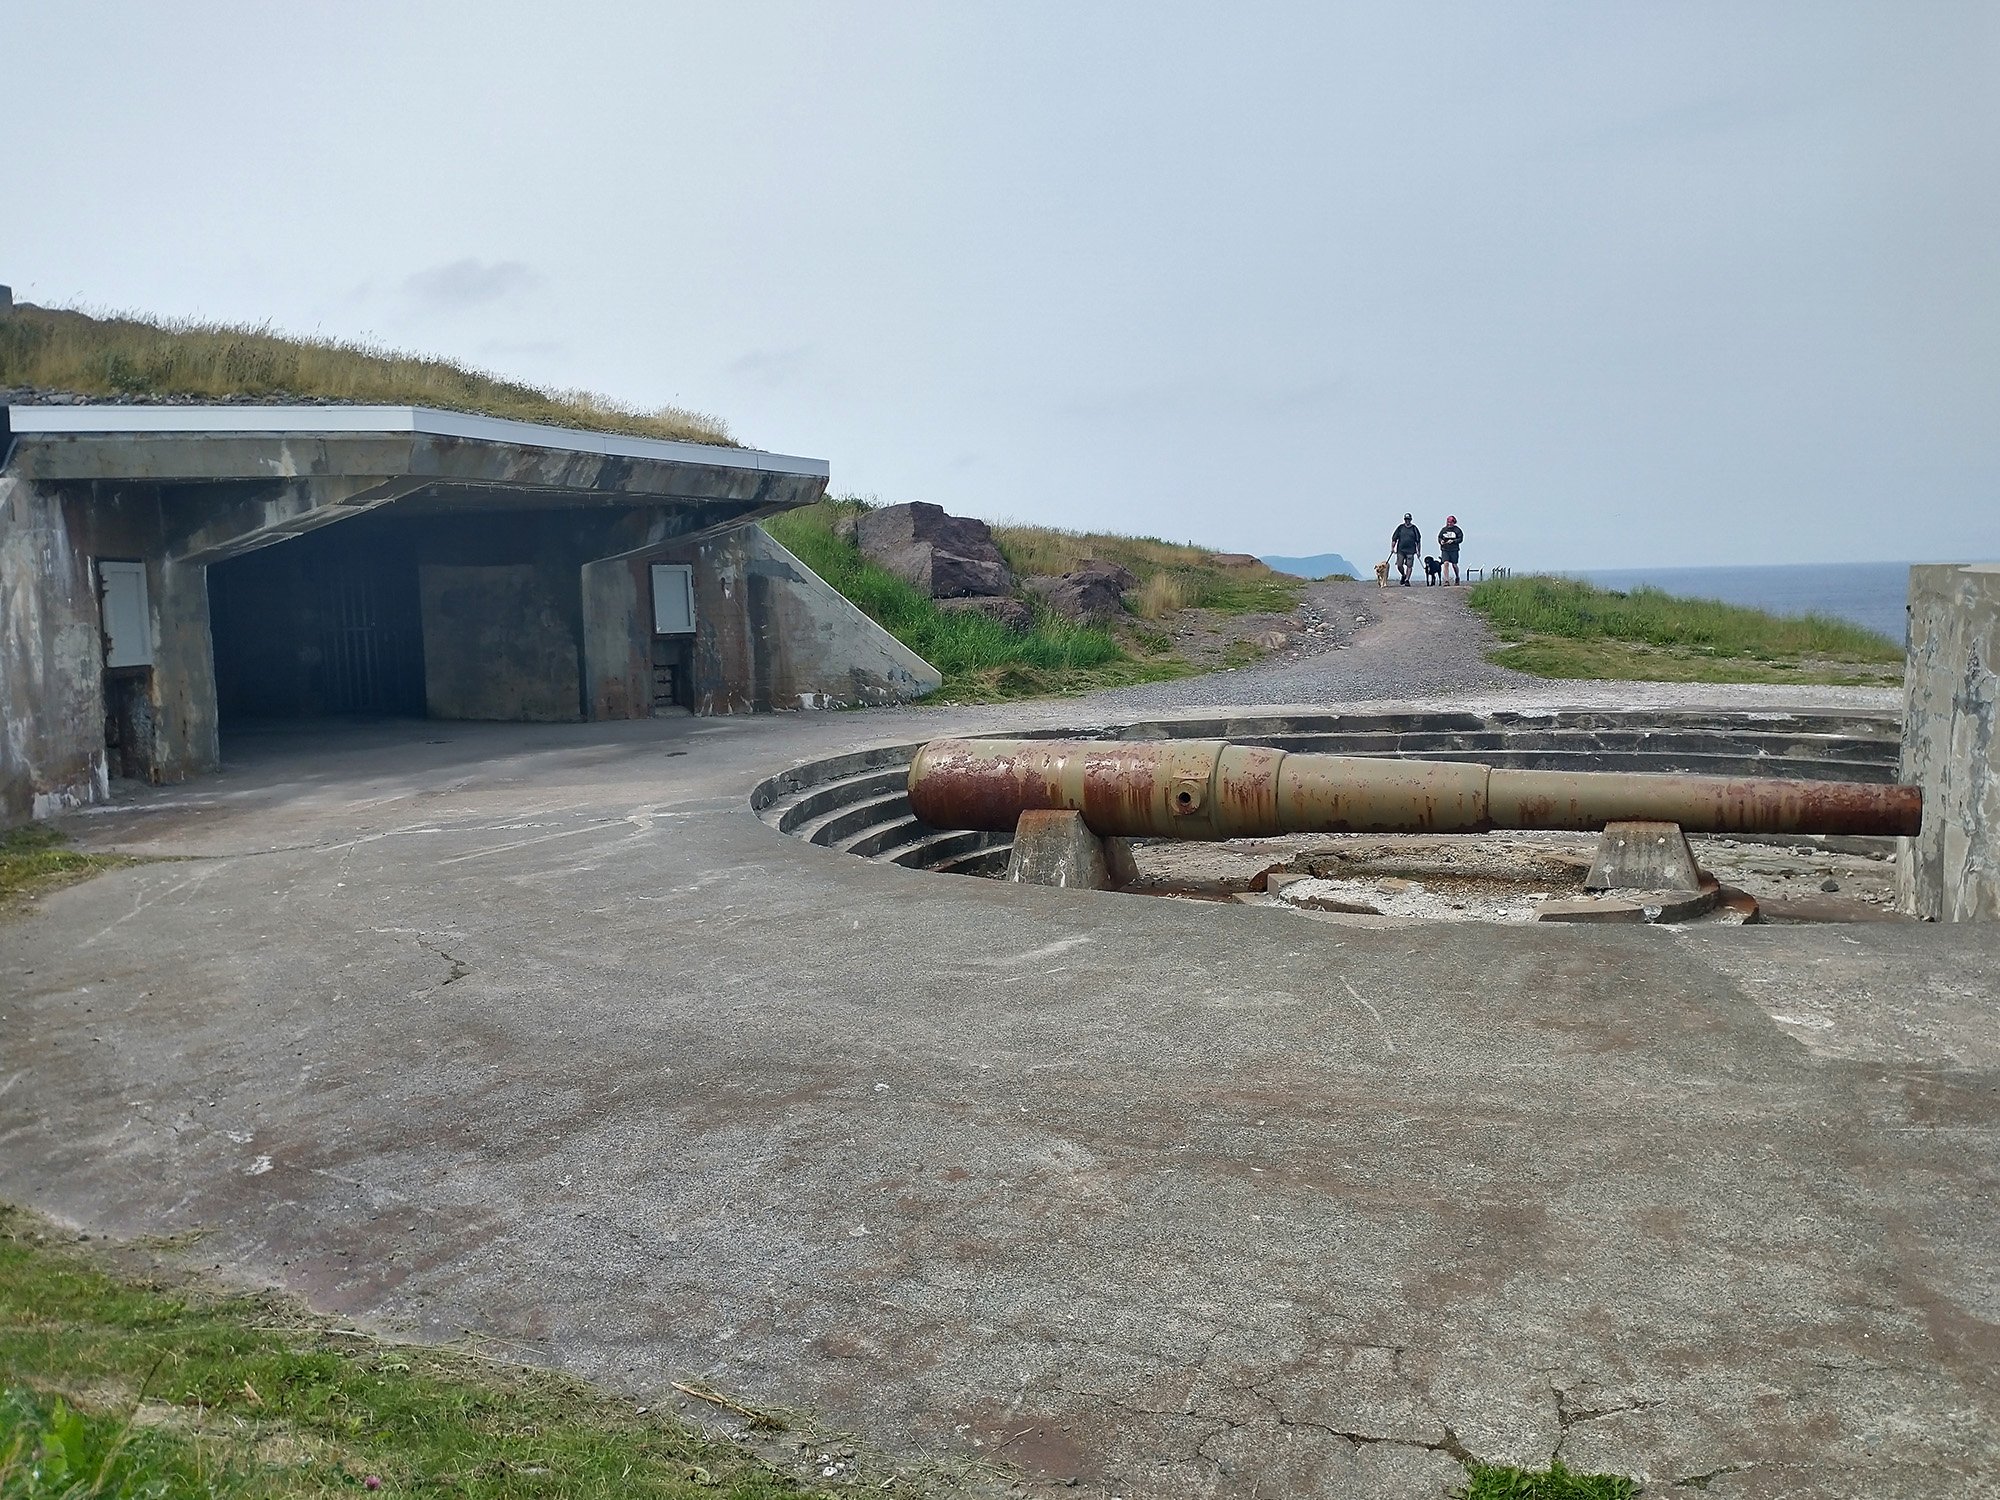 Cape Spear was used as a military base during WW2 as well, with big guns stationed on the hill in case of axis attacks on shipping lanes.